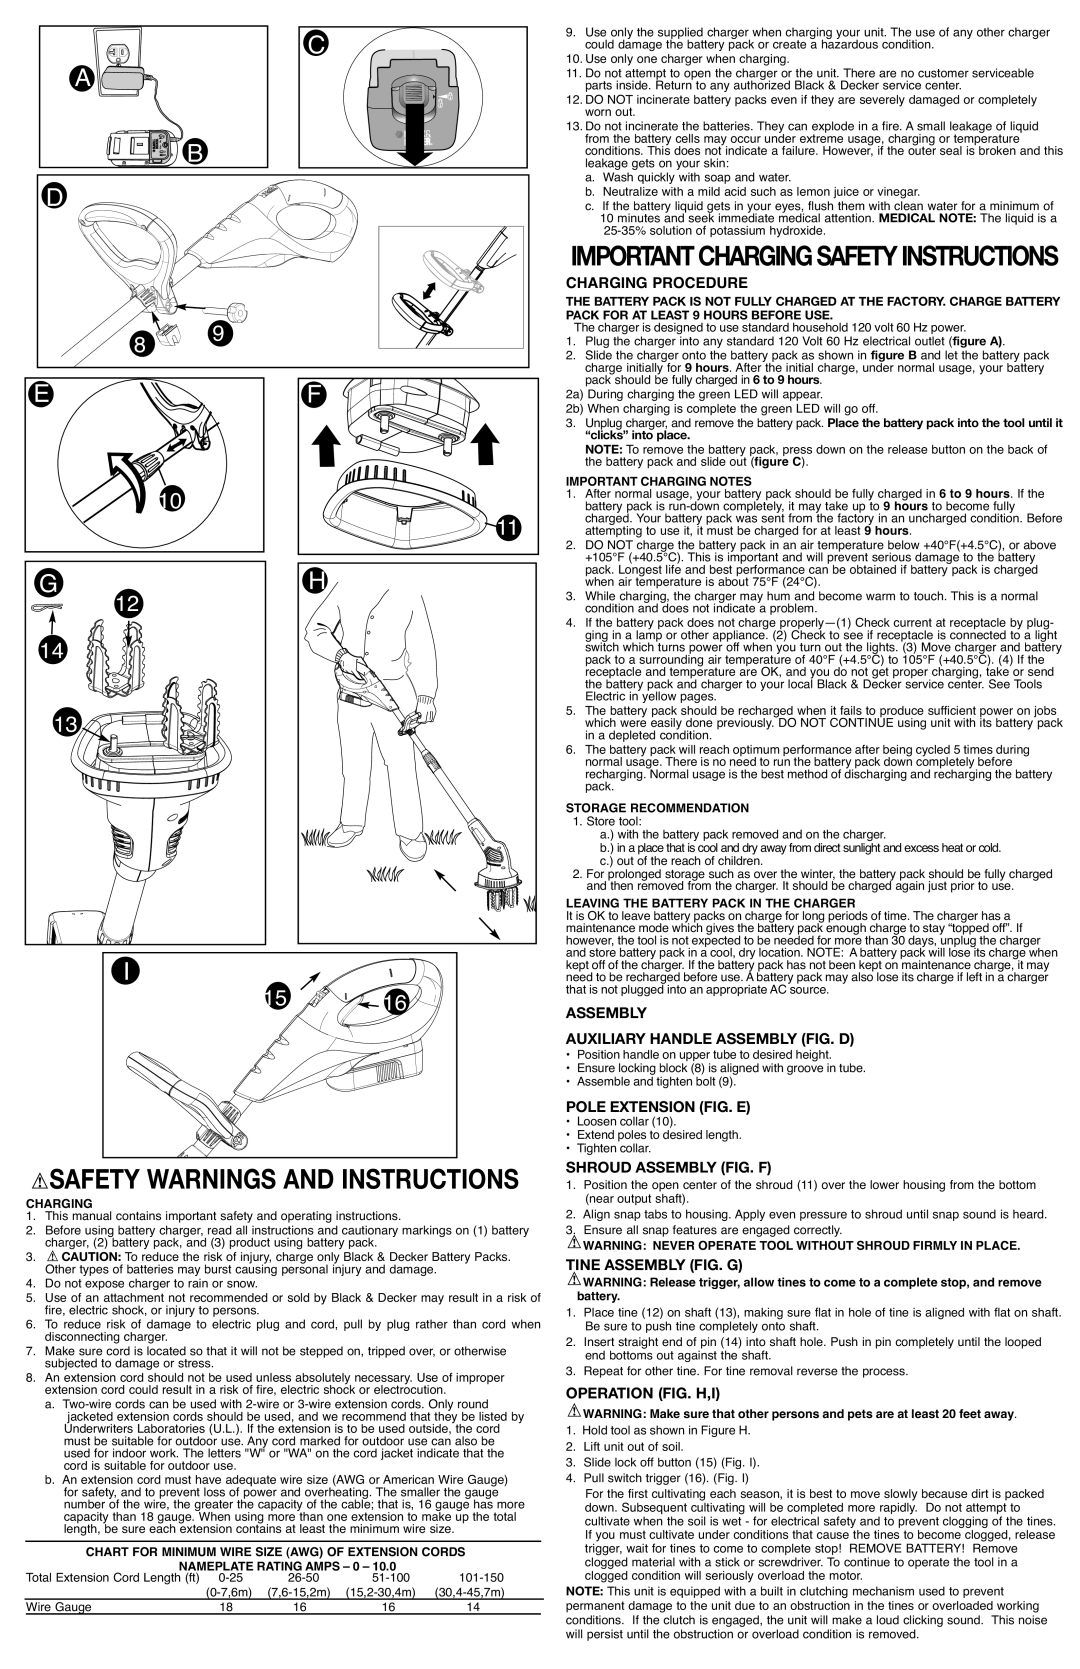 Black & Decker GC818R Safety Warnings And Instructions, Importantchargingsafetyinstructions, Charging Procedure 